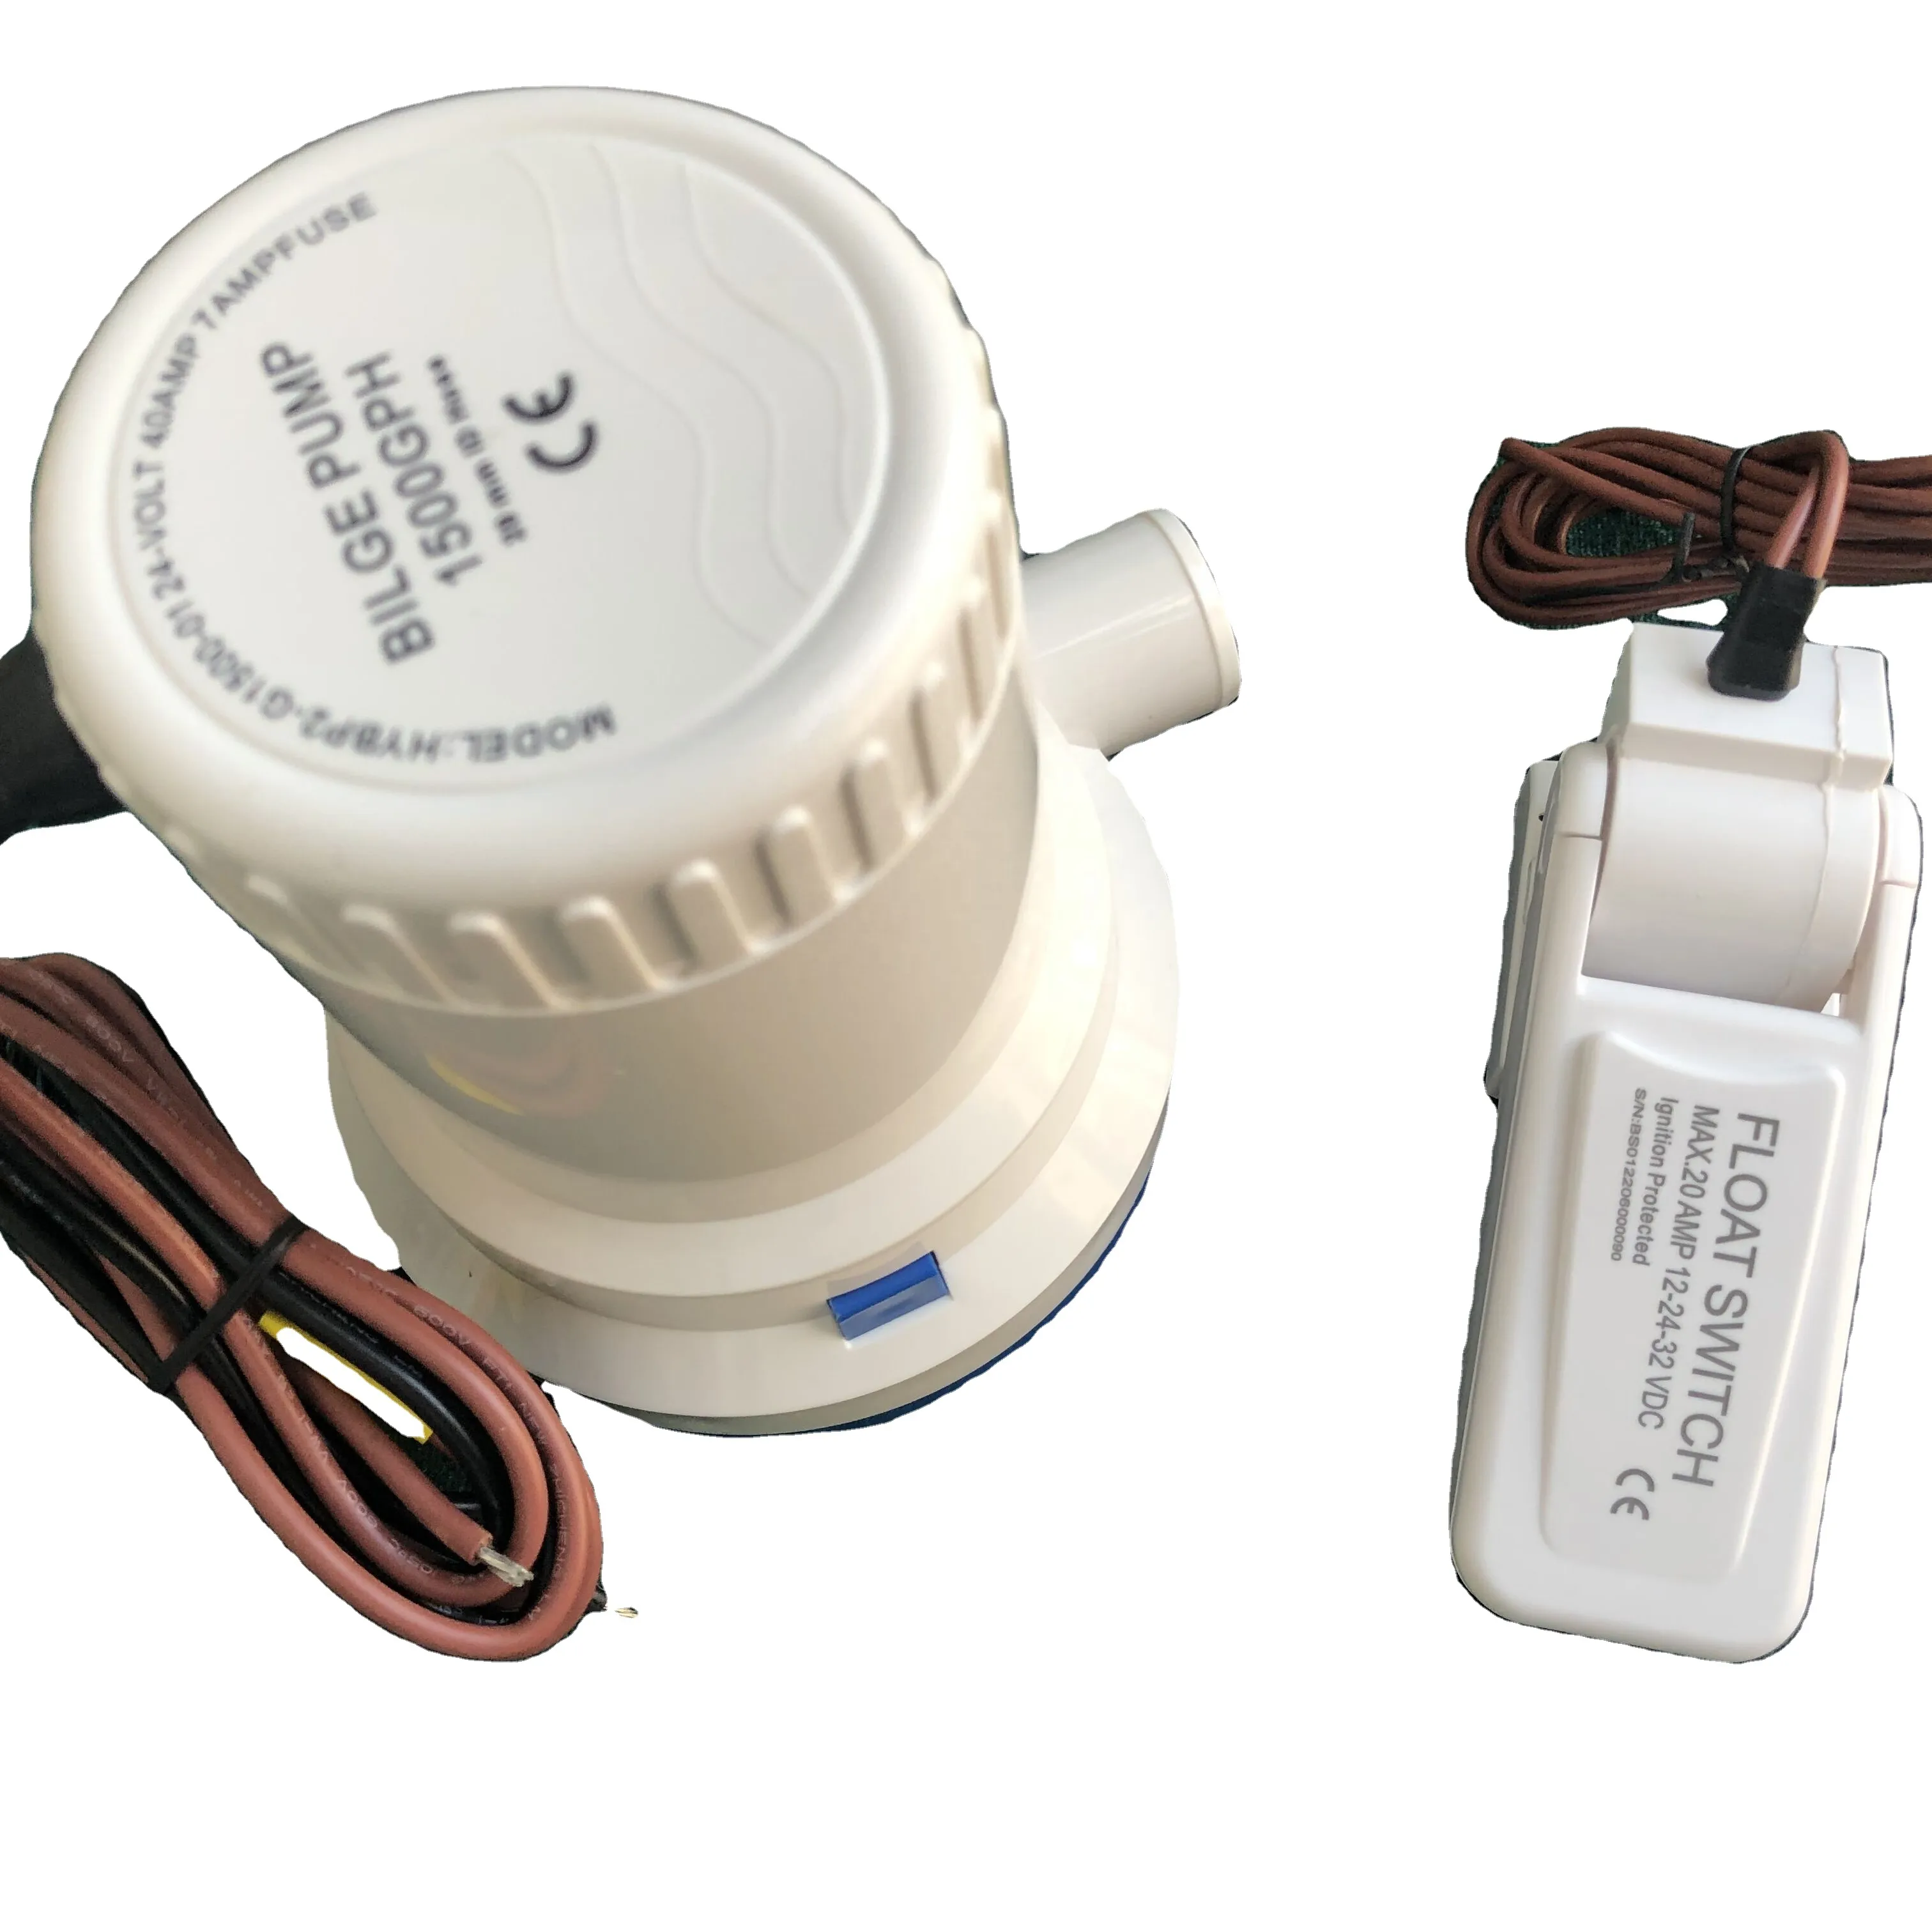 MARINE BILGE PUMP 24V DC 1500GPH IMPELLER SMALL BOAT WATER PUMPS WITH FLOAT SWITCH